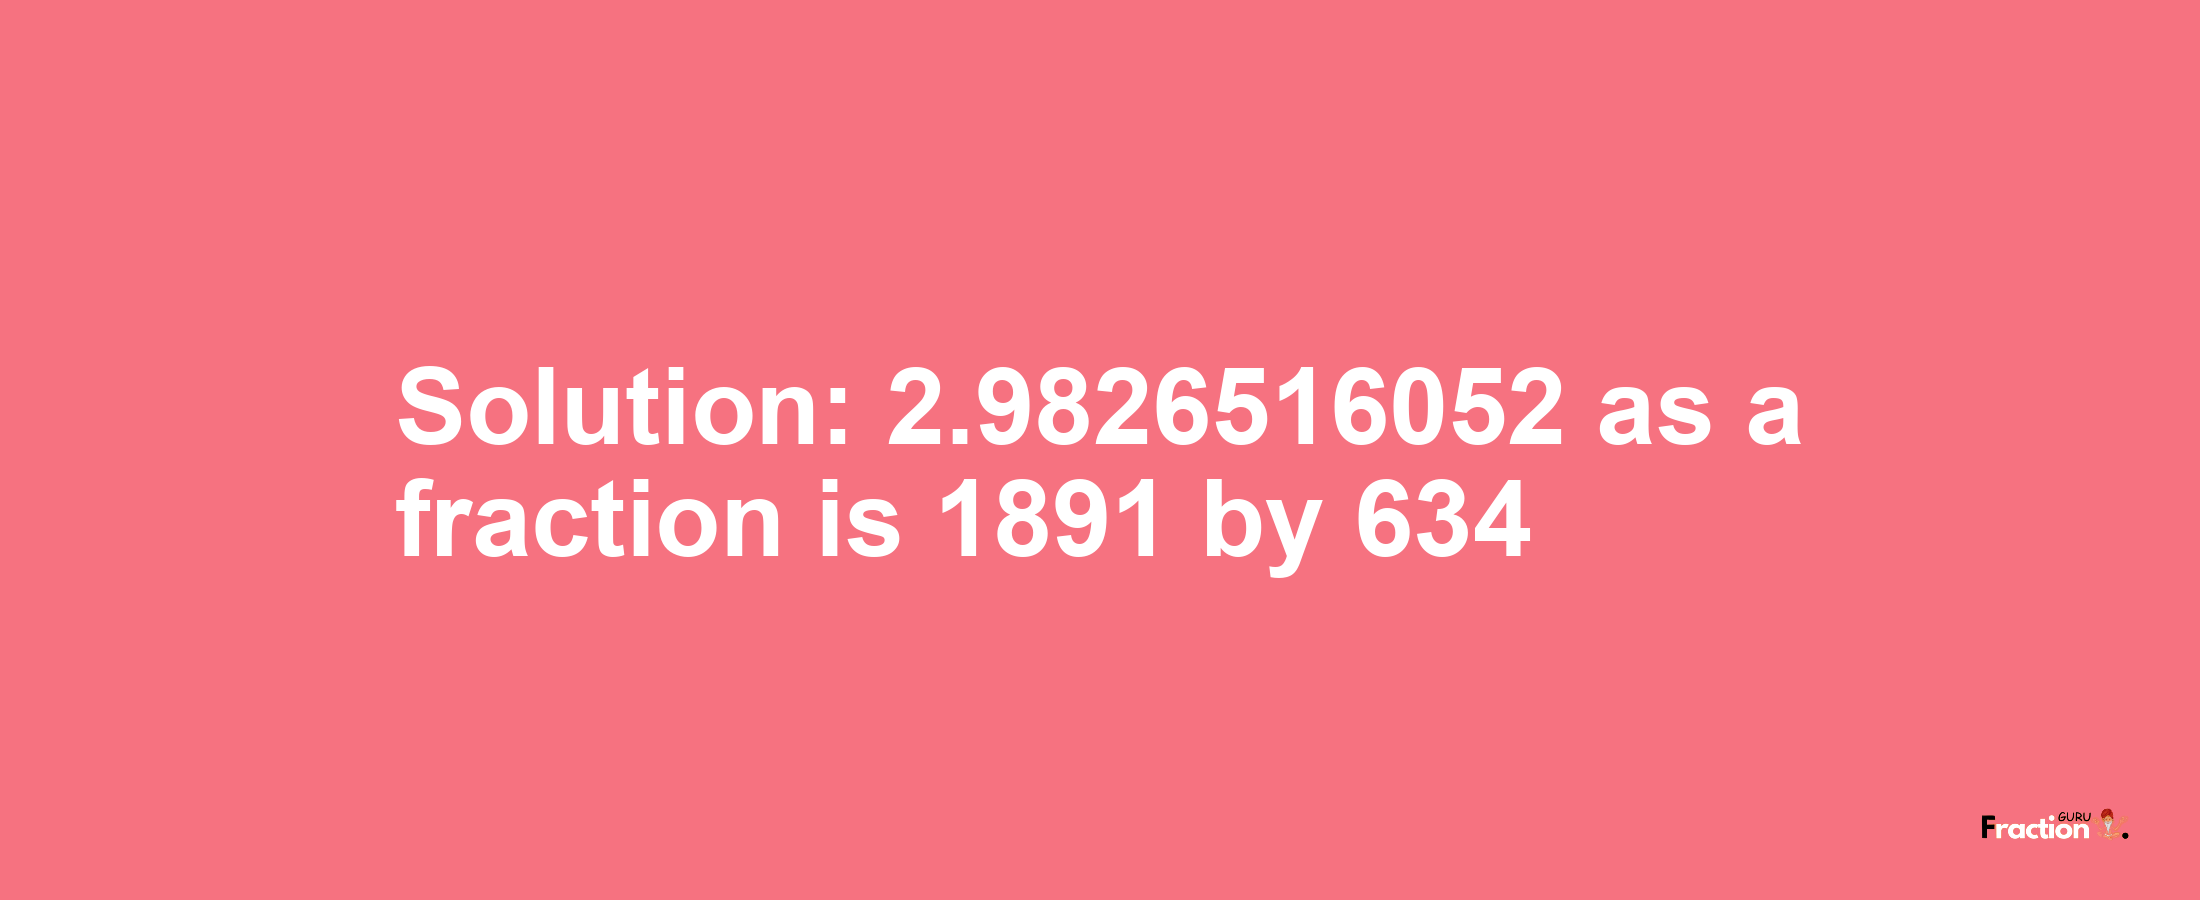 Solution:2.9826516052 as a fraction is 1891/634